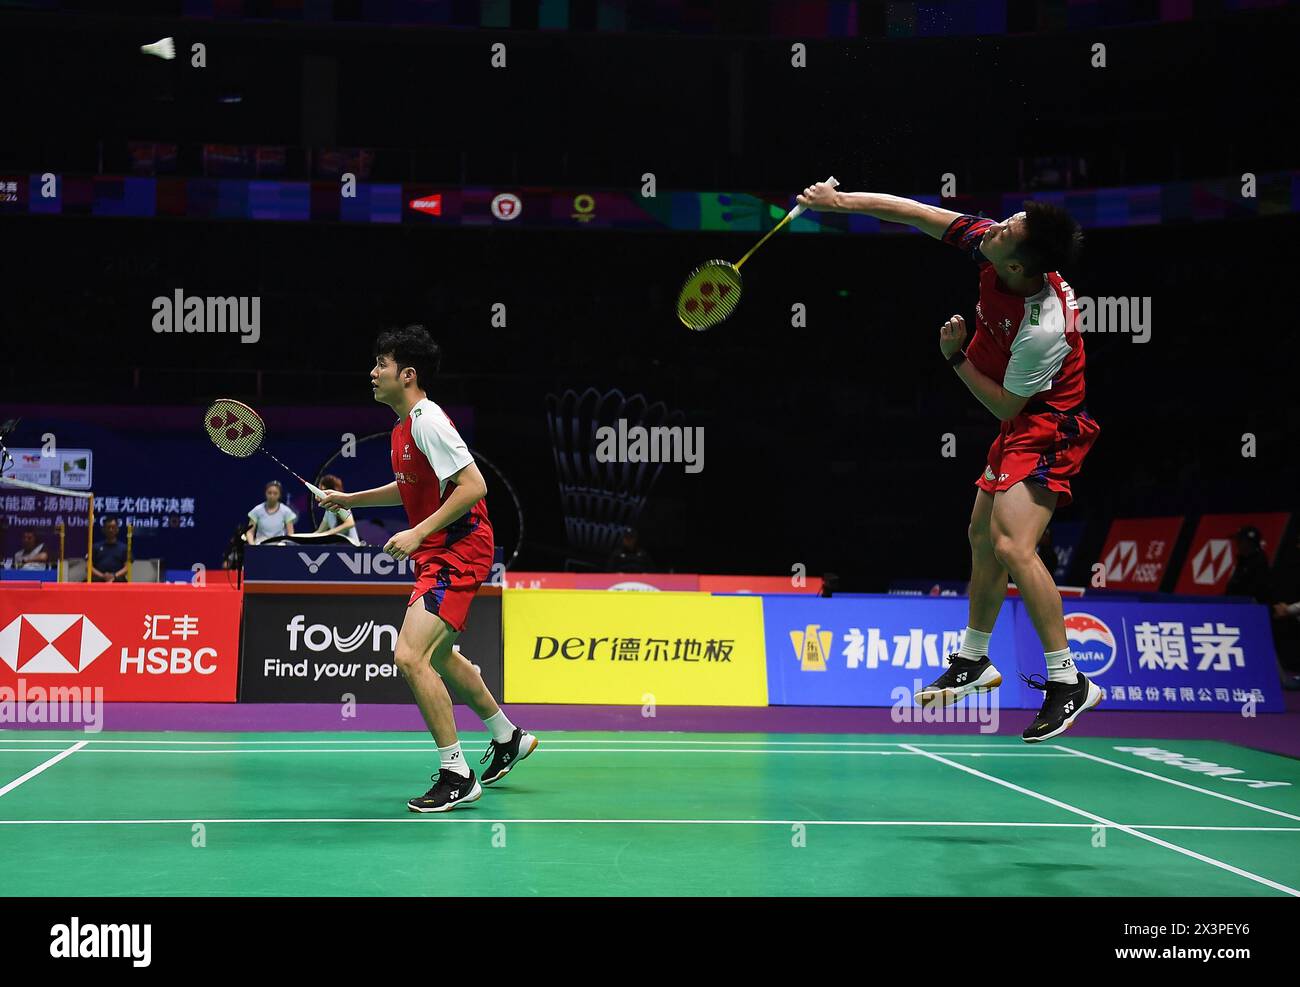 Chengdu, China's Sichuan Province. 28th Apr, 2024. He Jiting/Ren Xiangyu (R) of China compete in the doubles match against lmran Wadia/Nyl Yakura of Canada during the group A match between China and Canada at BWF Thomas Cup Finals in Chengdu, southwest China's Sichuan Province, April 28, 2024. Credit: Hou Zhaokang/Xinhua/Alamy Live News Stock Photo